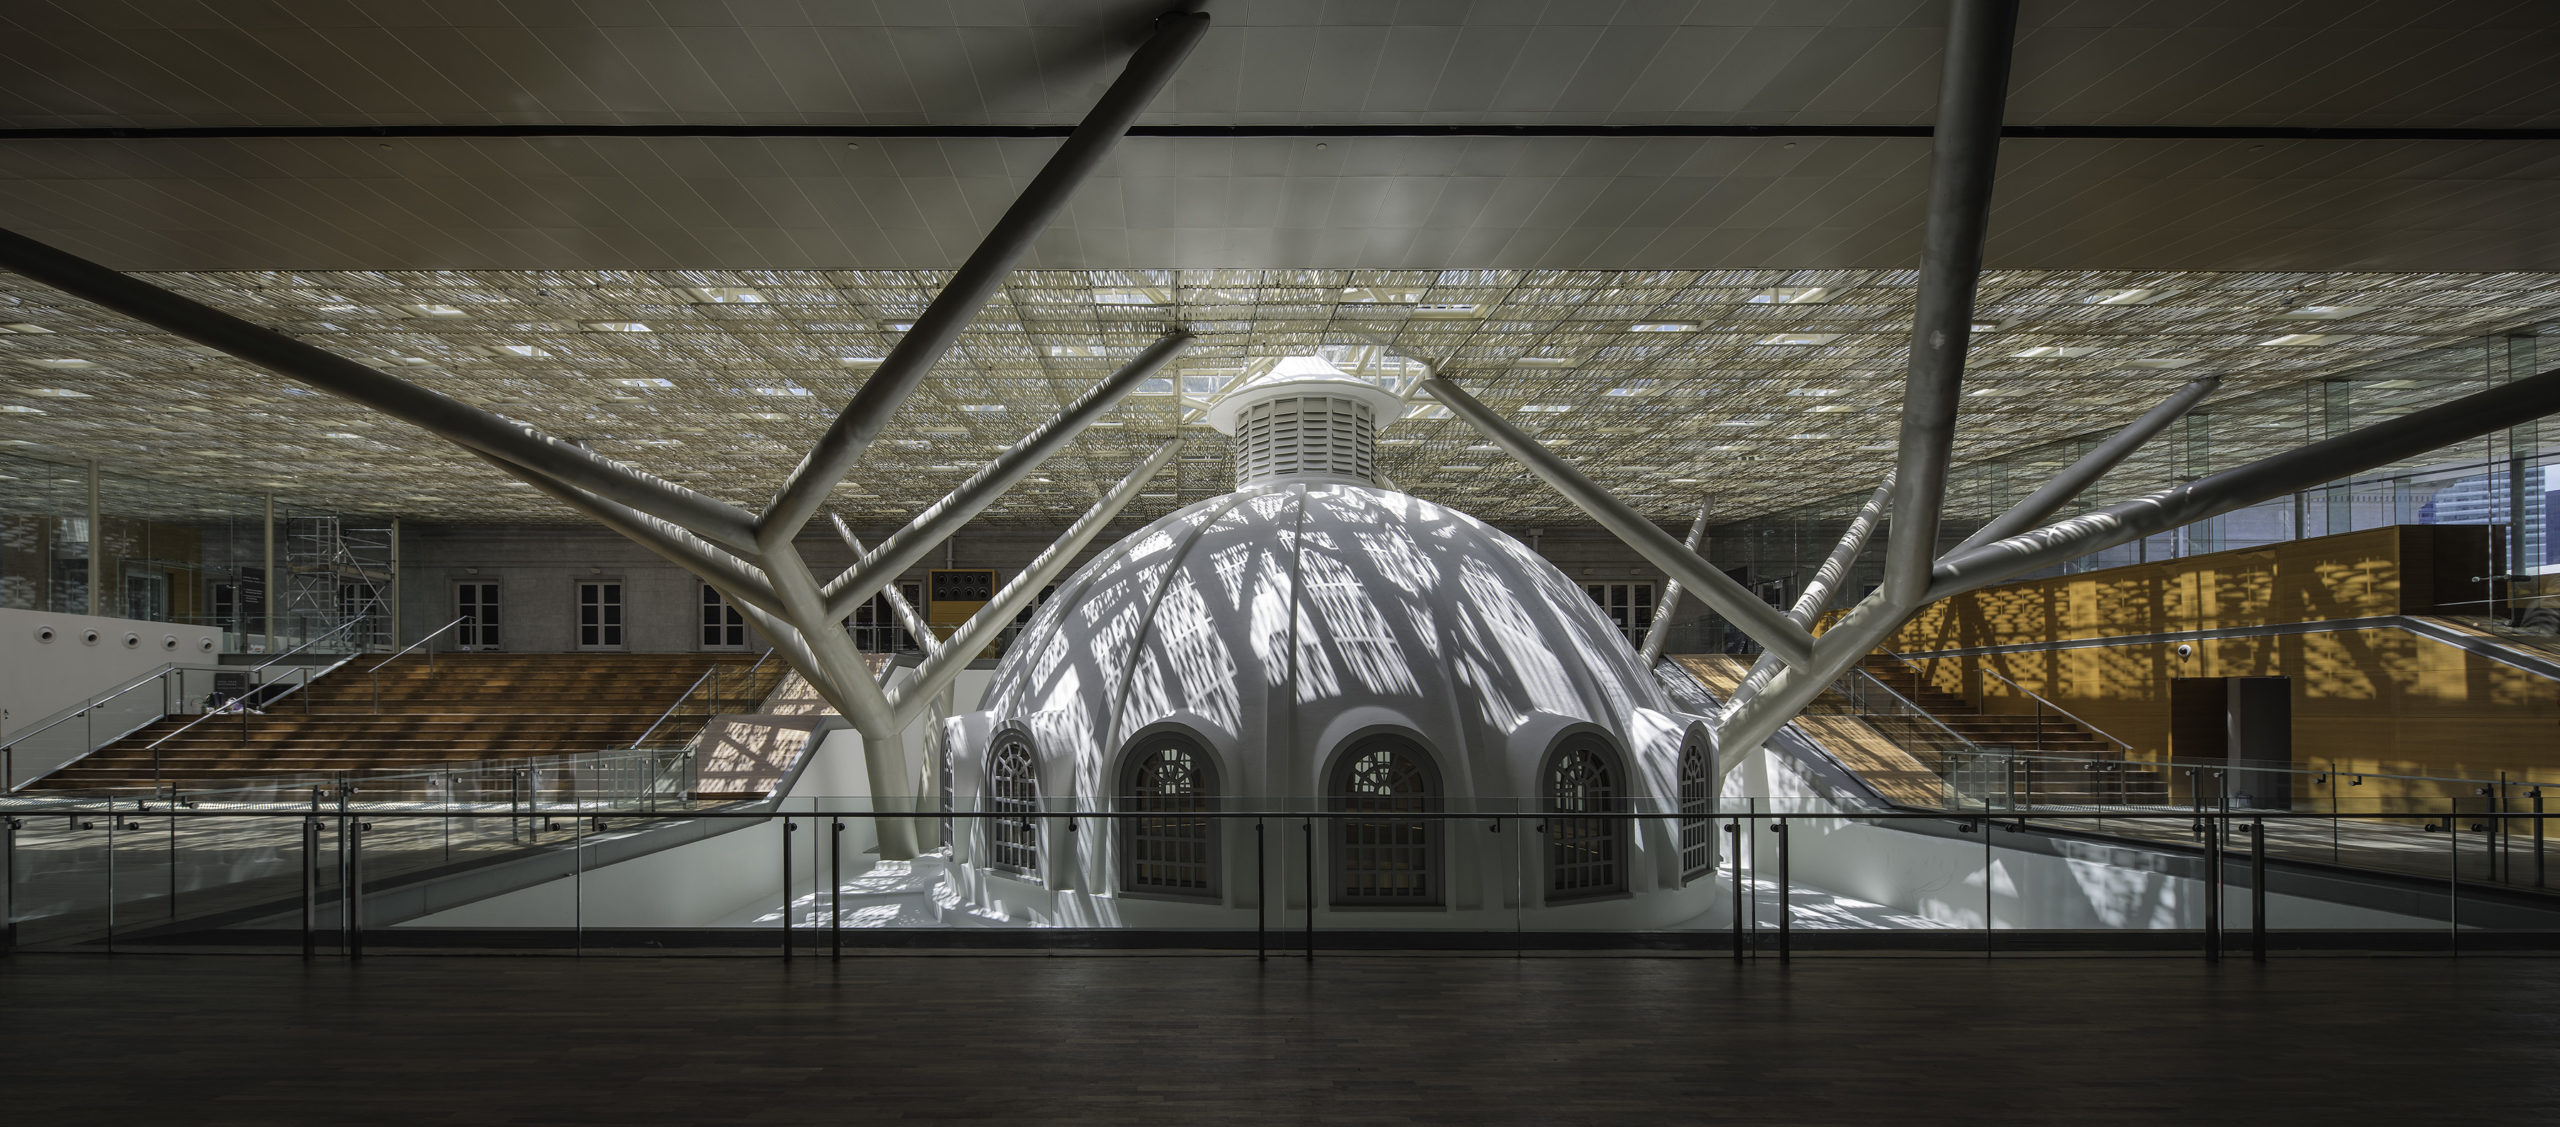 Soft, natural lighting filtered by the roof canopy, National Gallery Singapore